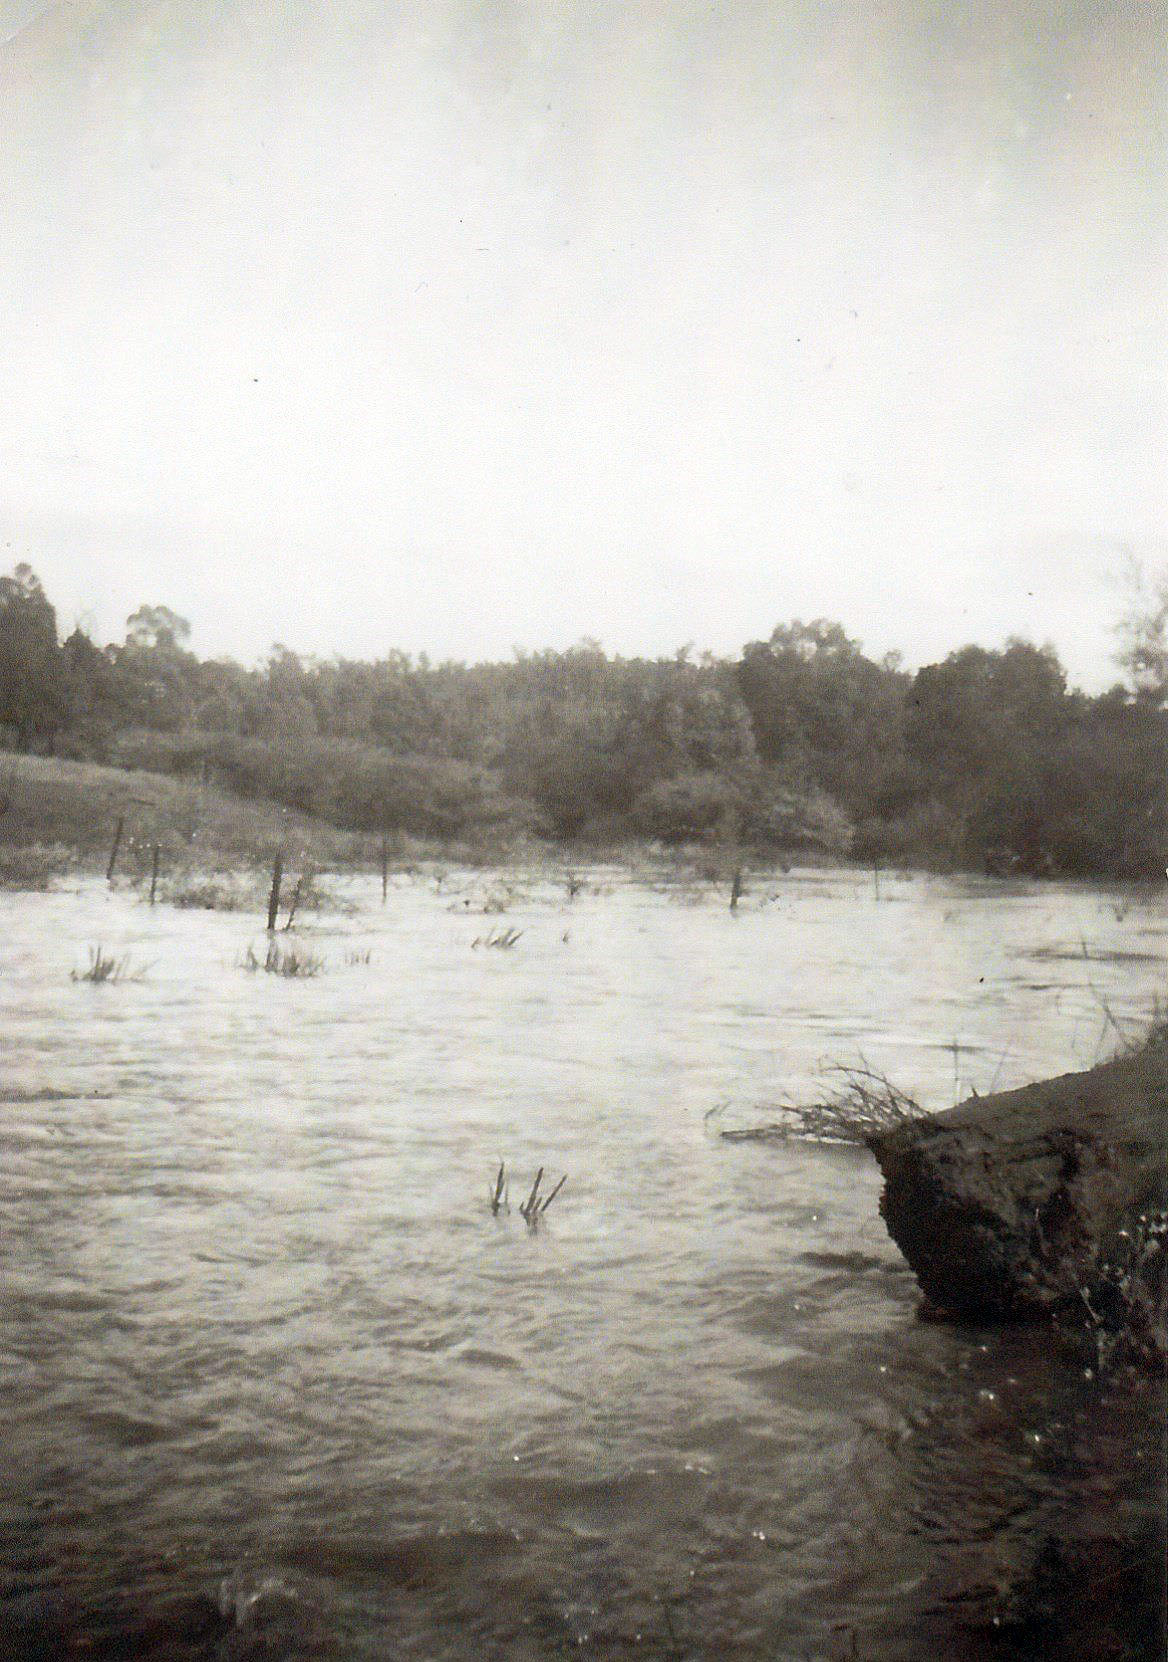 Photo of Jane Brook in flood from Bommeli's property.